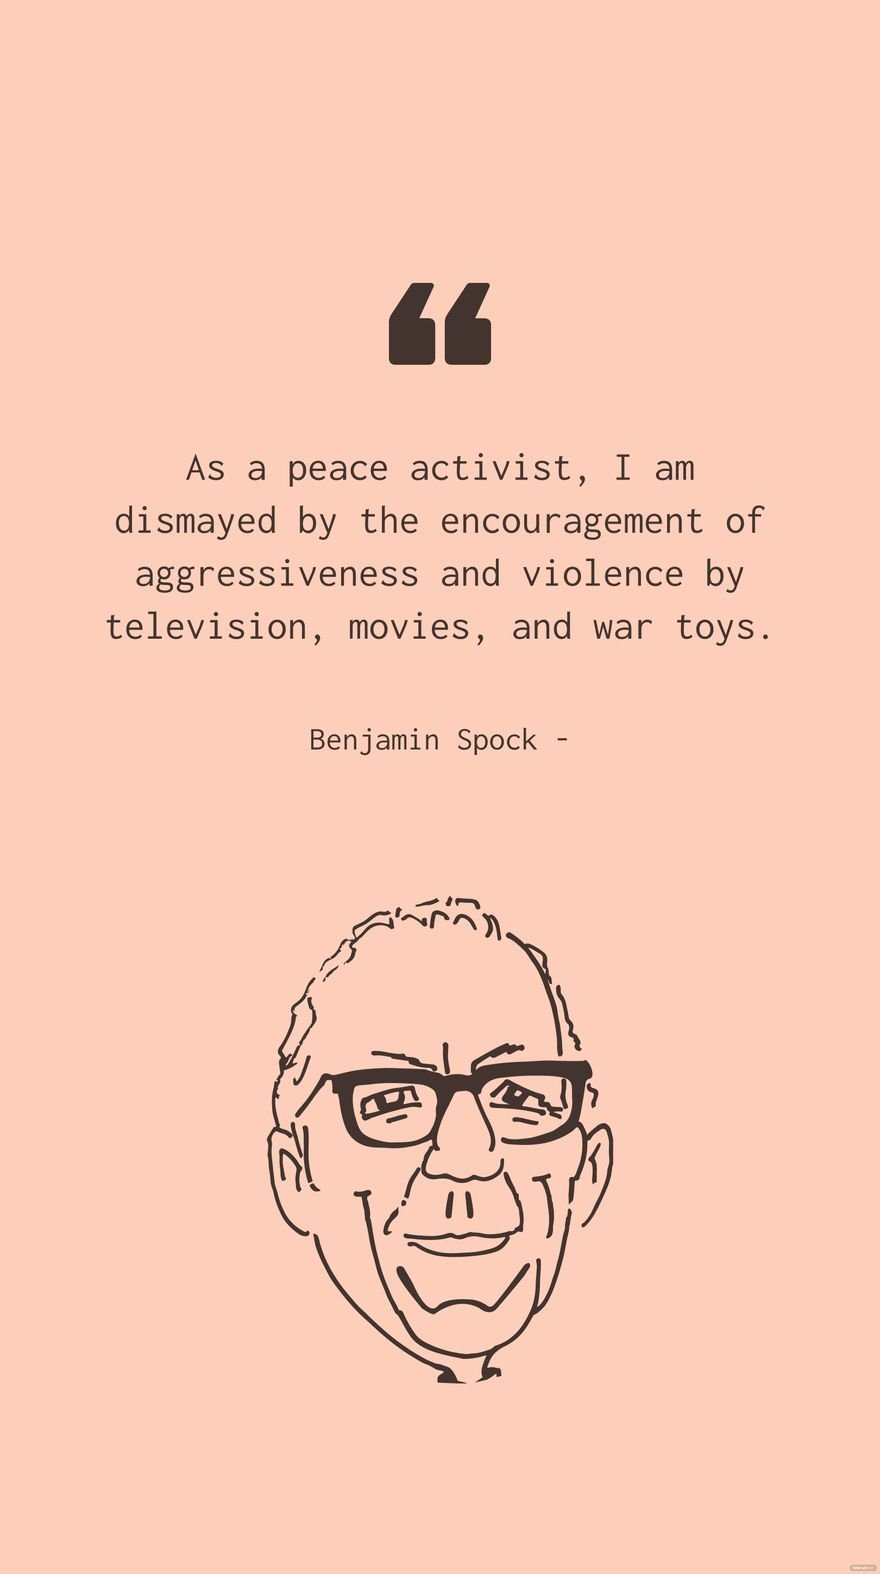 Benjamin Spock - As a peace activist, I am dismayed by the encouragement of aggressiveness and violence by television, movies, and war toys.